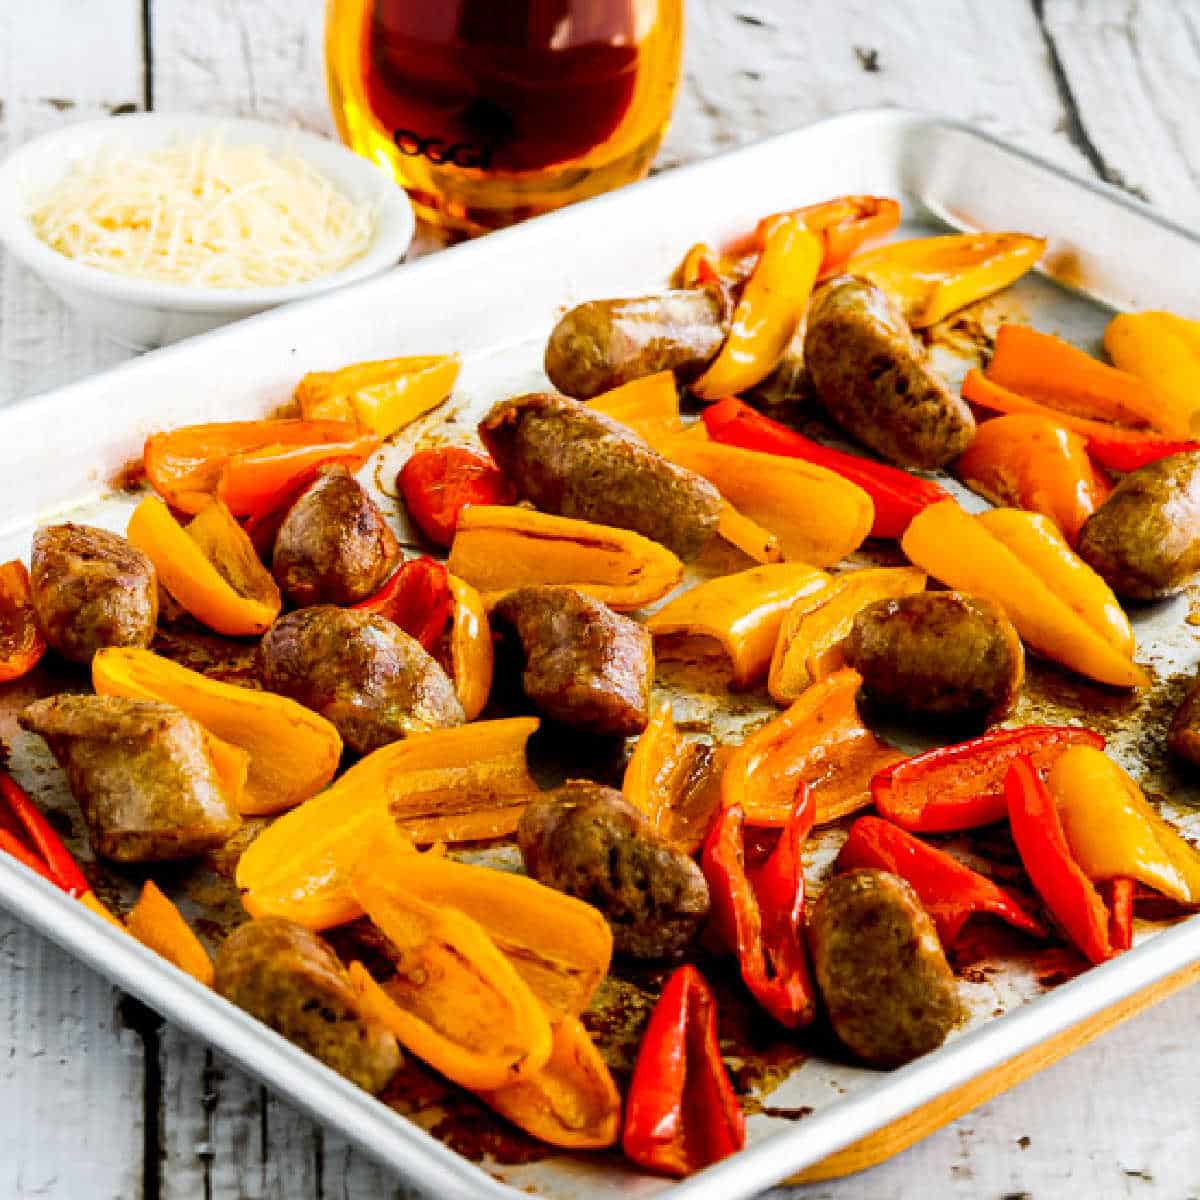 A square image of an Italian sausage meal and a small Chinese sweet pepper meal appearing on a tray